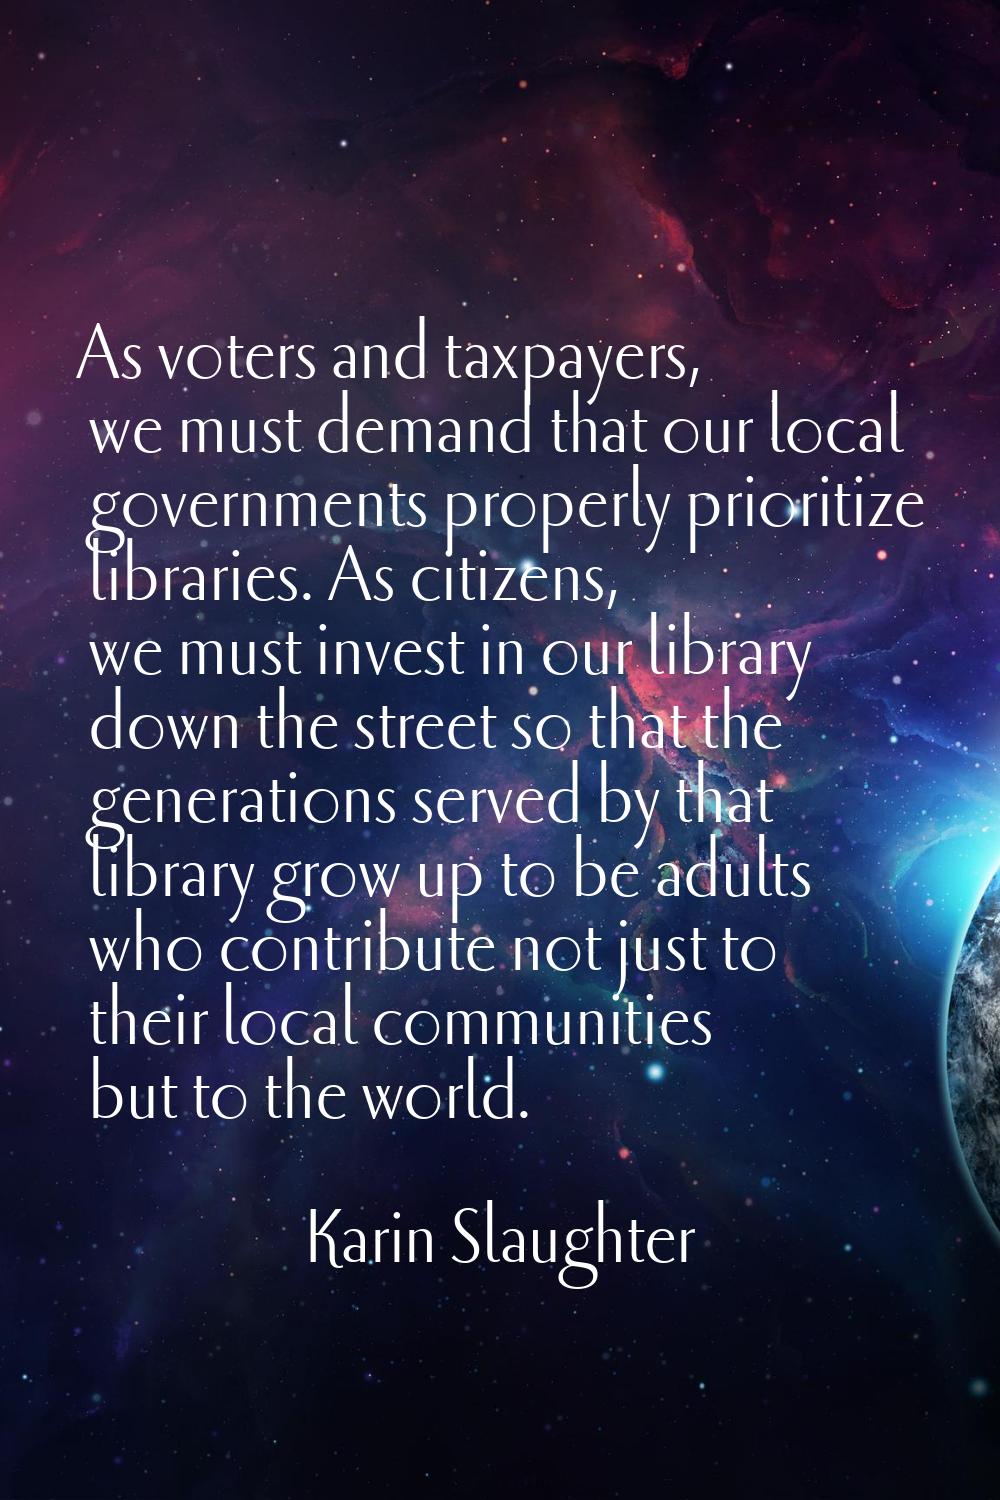 As voters and taxpayers, we must demand that our local governments properly prioritize libraries. A